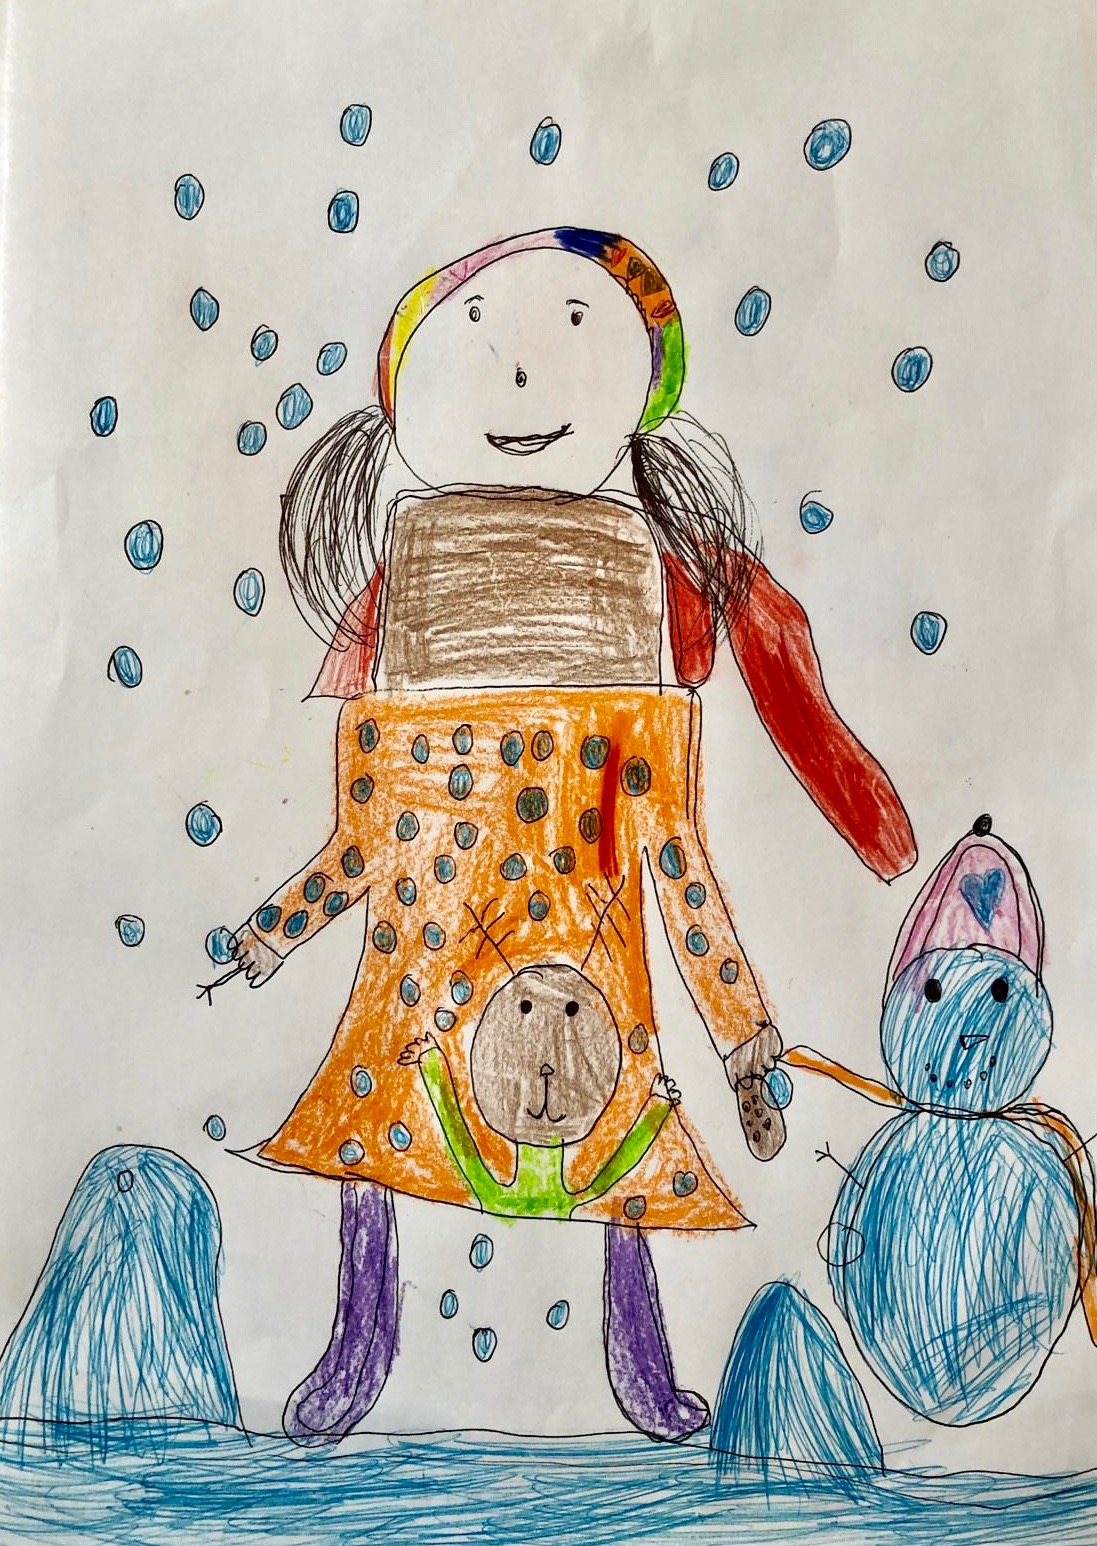 'The Winter Picture' by Tara (6) from Dublin